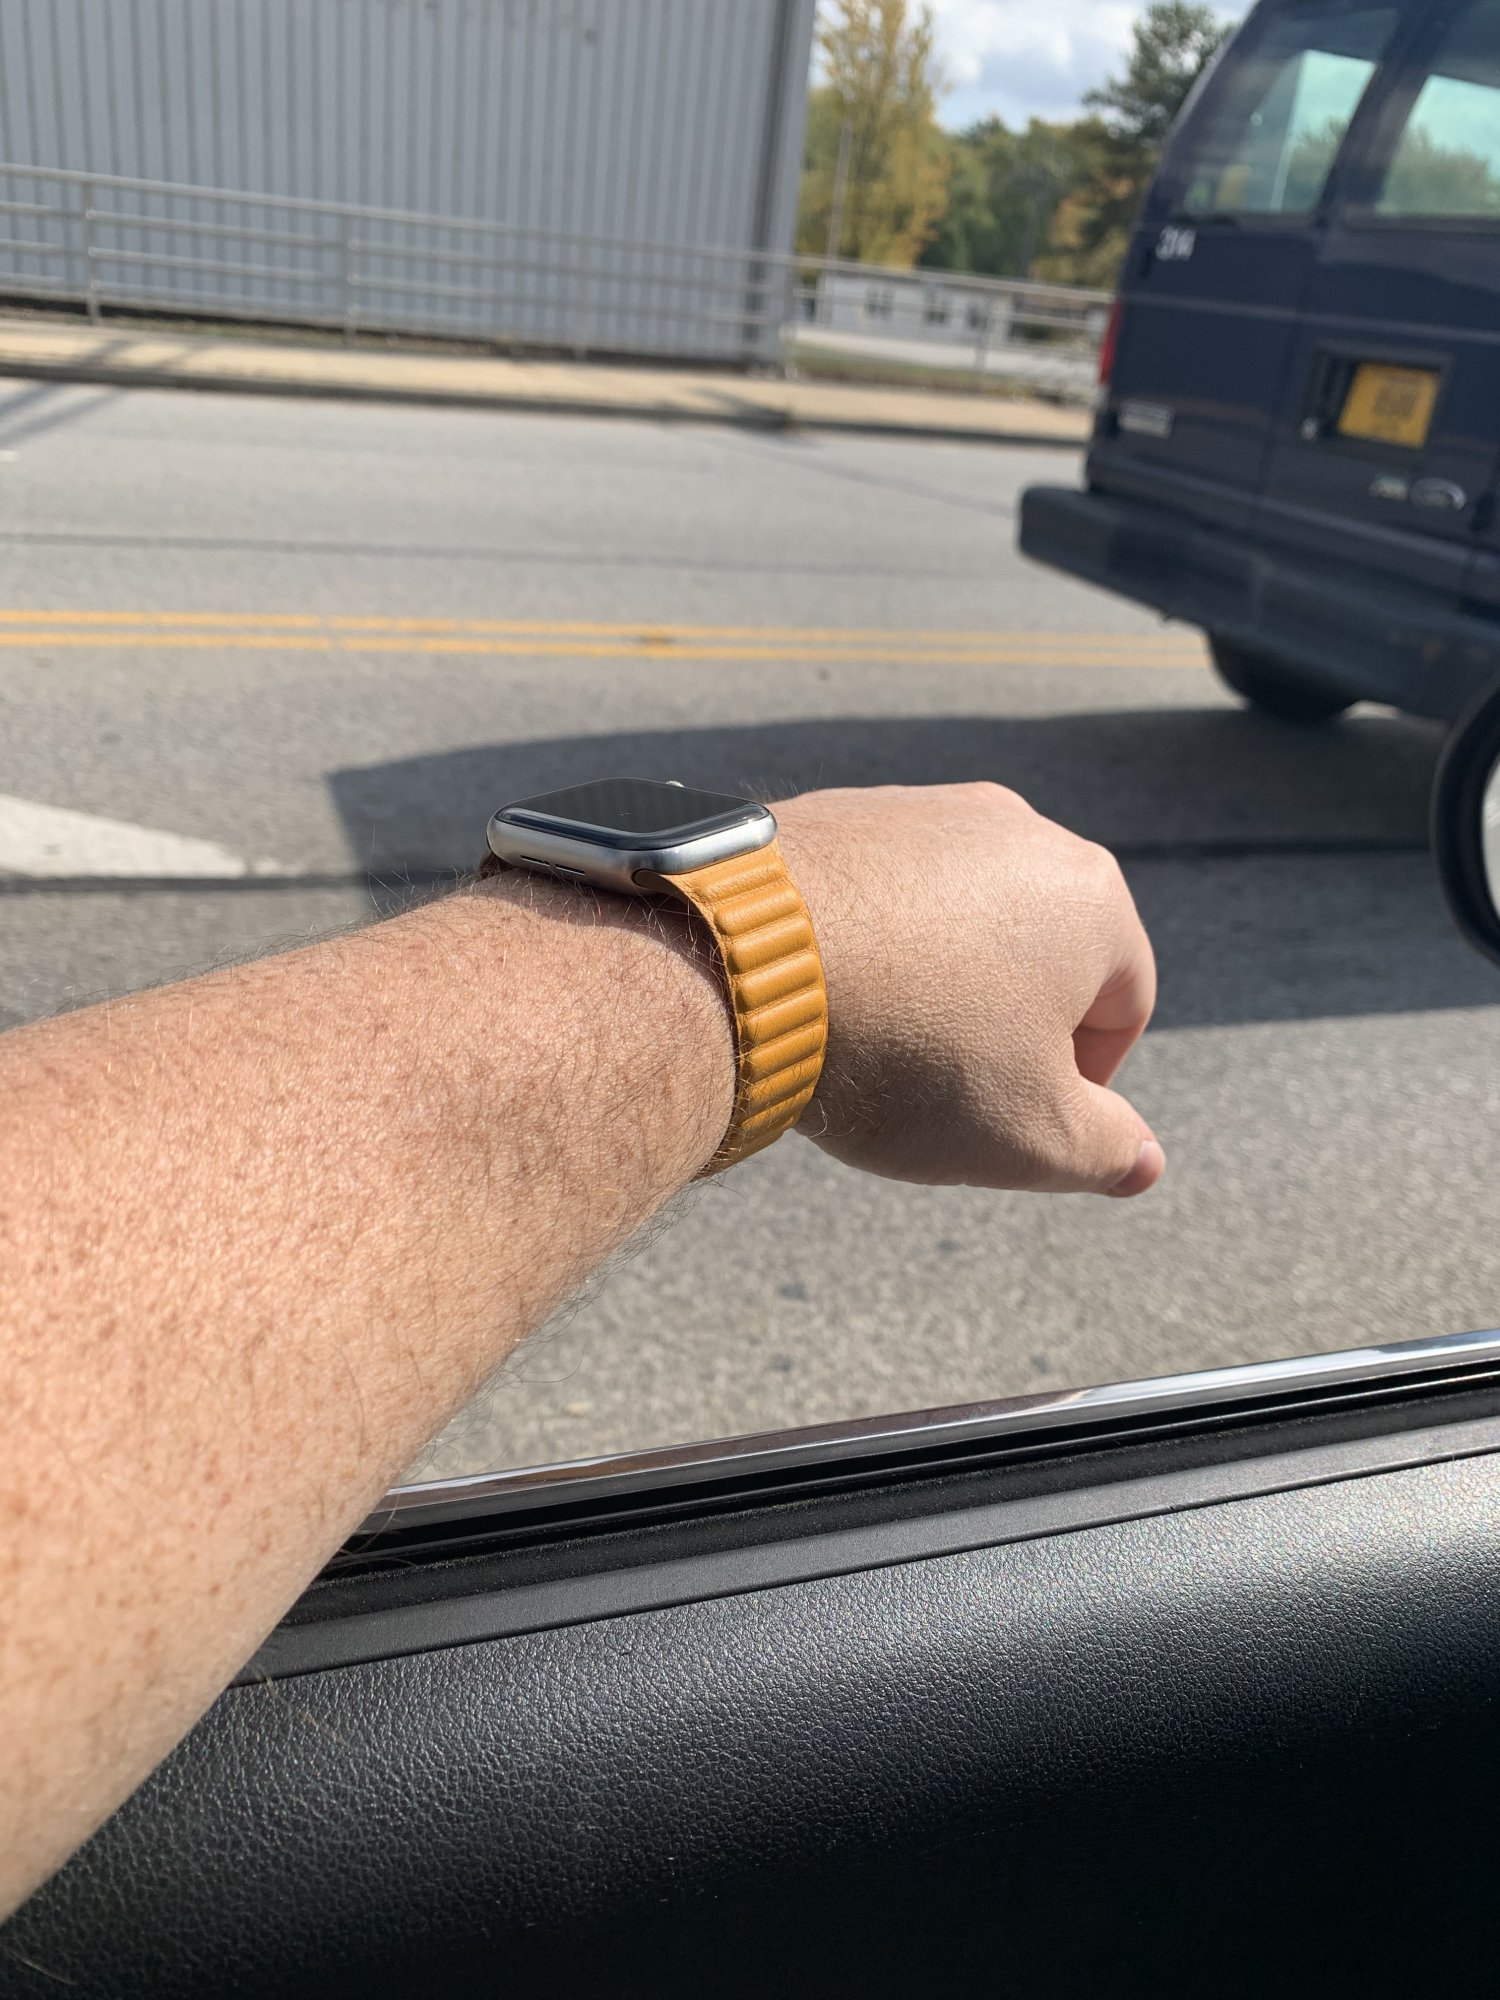 Apple Watch Leather Link Band Review and Impressions